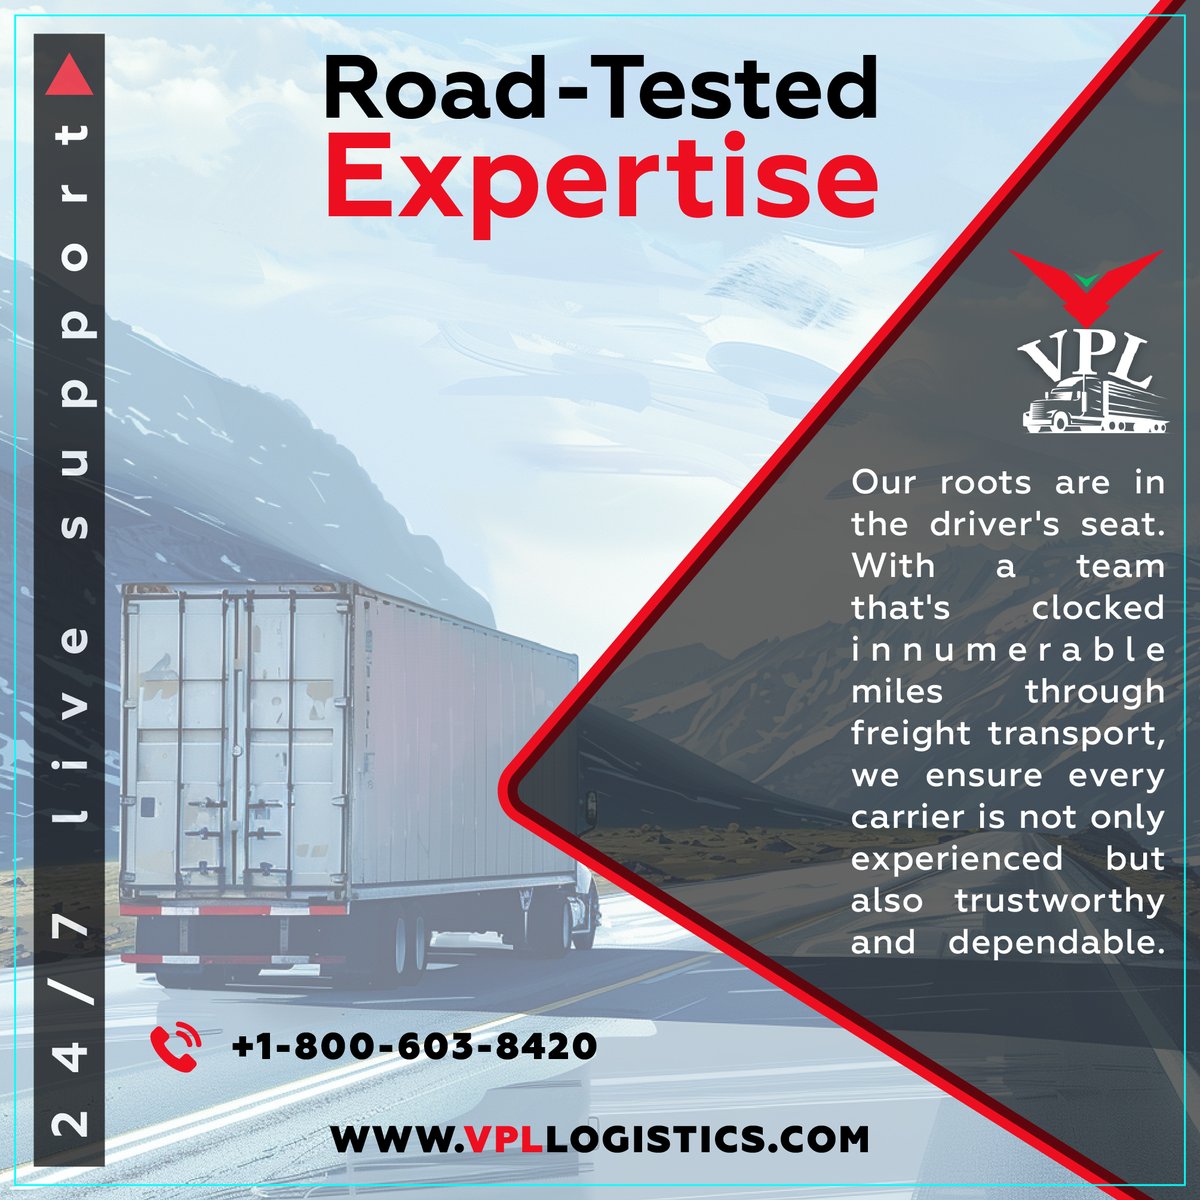 Road-Tested Expertise
Our roots are in the driver's seat.
.
.
.
vpllogistics.com
.
.
.
#vpllogistics #freightagent #truckingindustry